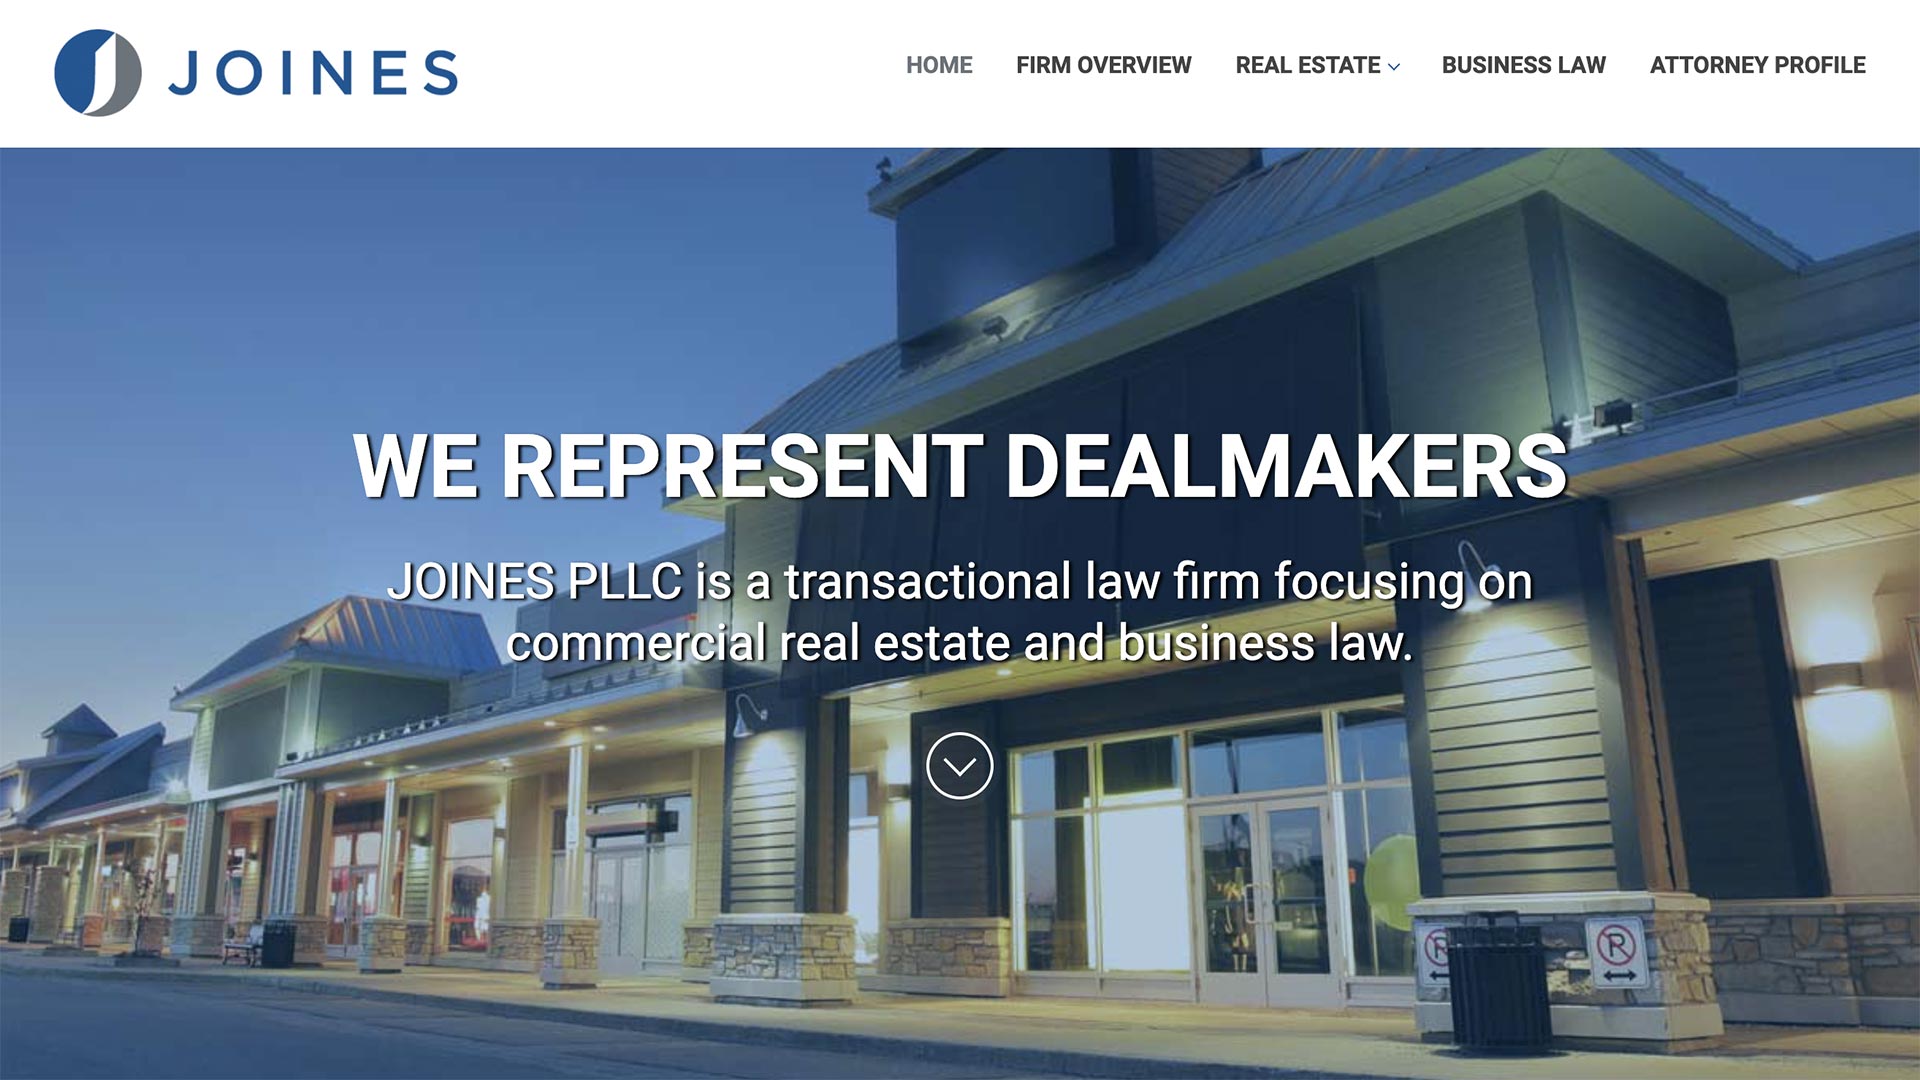 Florida Law Firm Website Example: Joines, PLLC